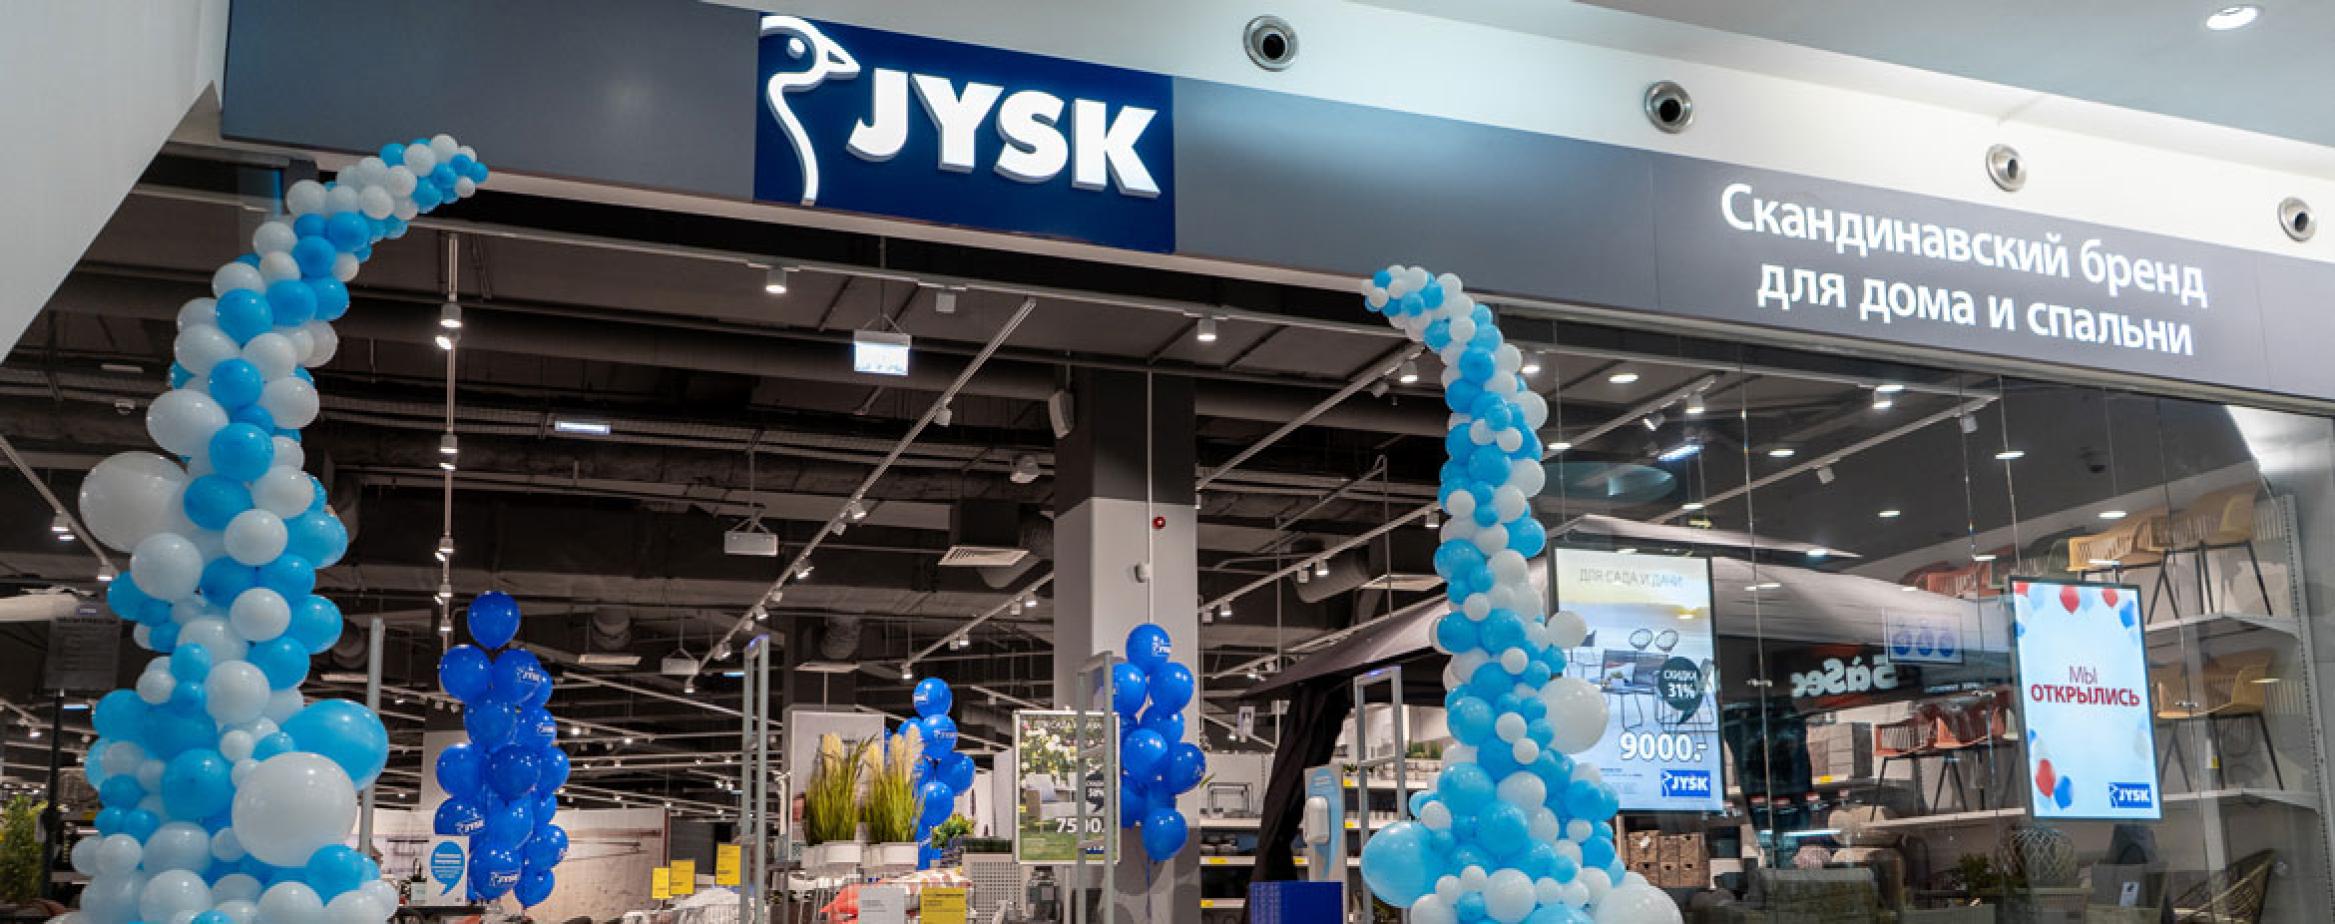 First store in Russia